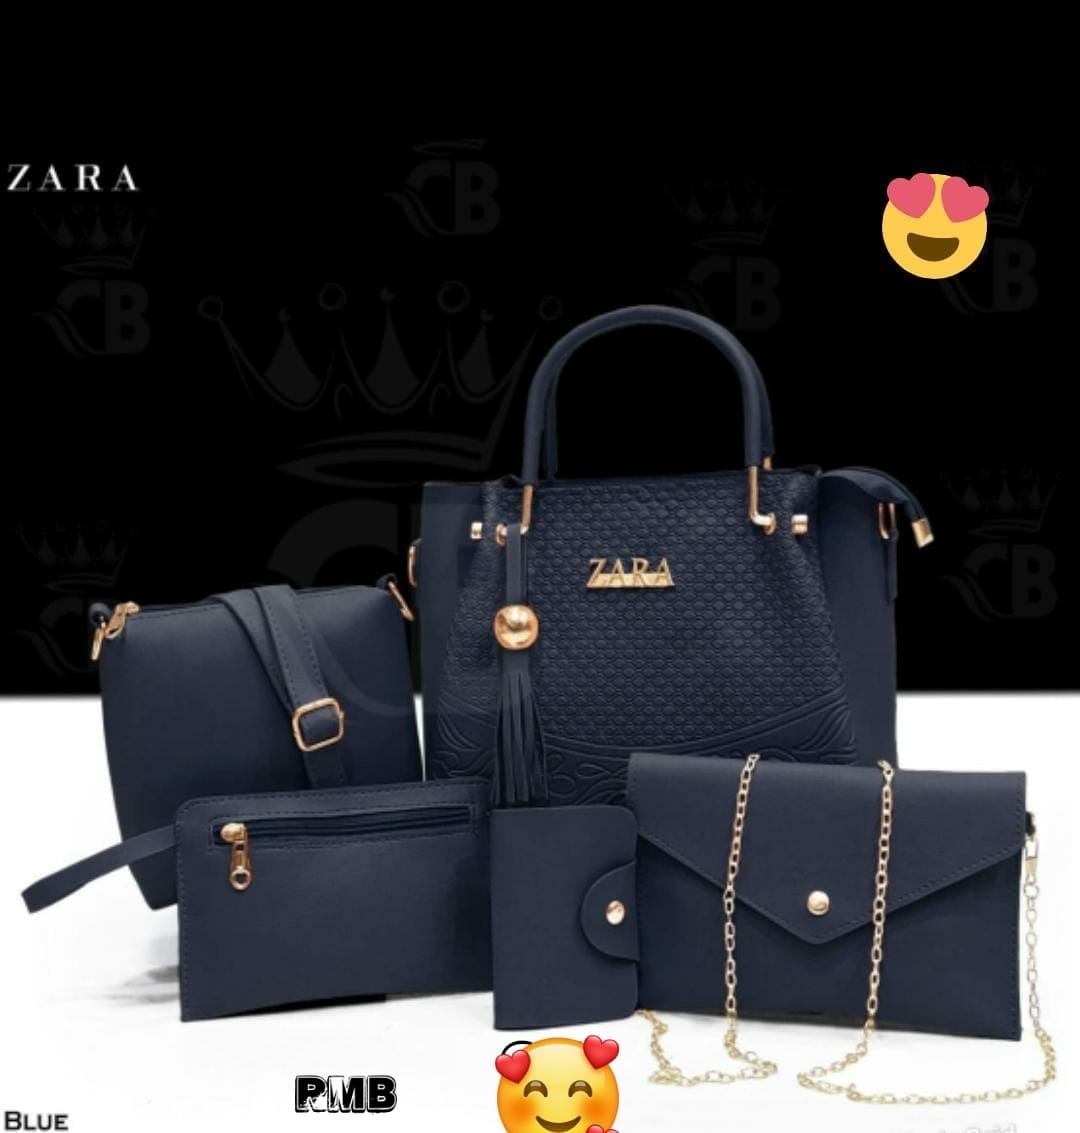 Zara's New Collection Of Horoscope Bags Are Perfect Christmas Gifts | LBB